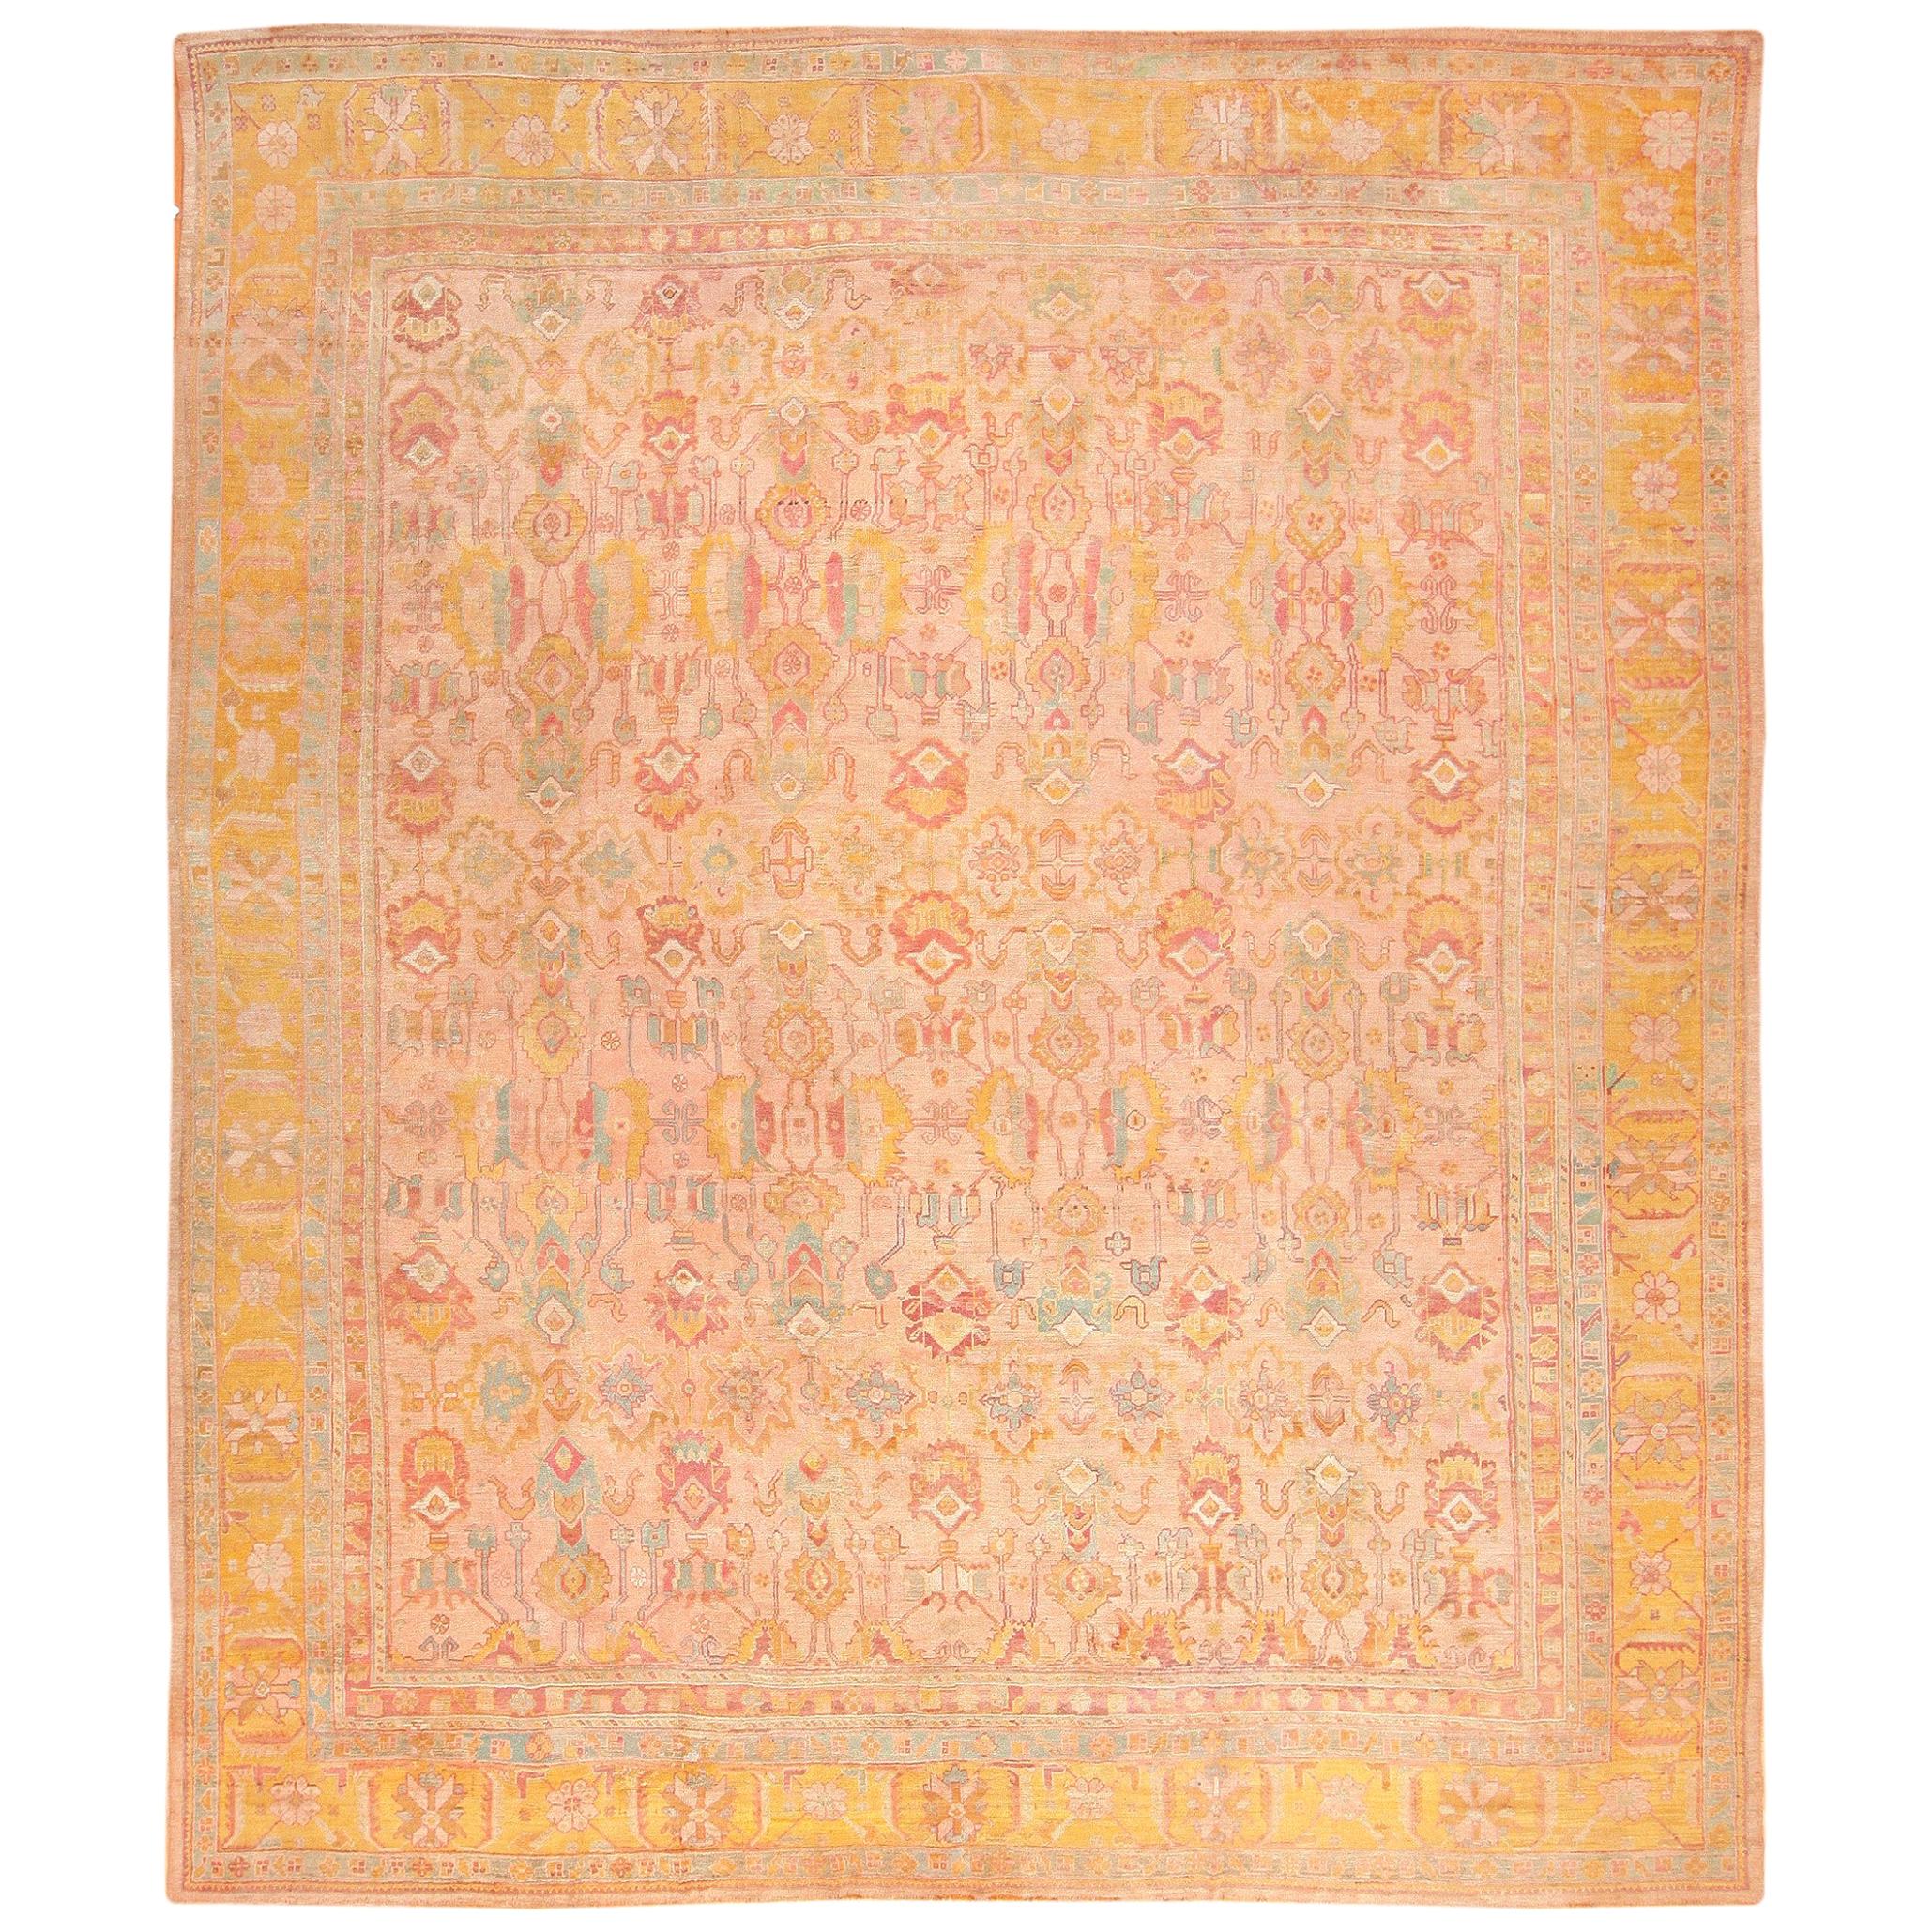 Nazmiyal Collection Antique Turkish Oushak Rug. Size: 14 ft 7 in x 17 ft 6 in